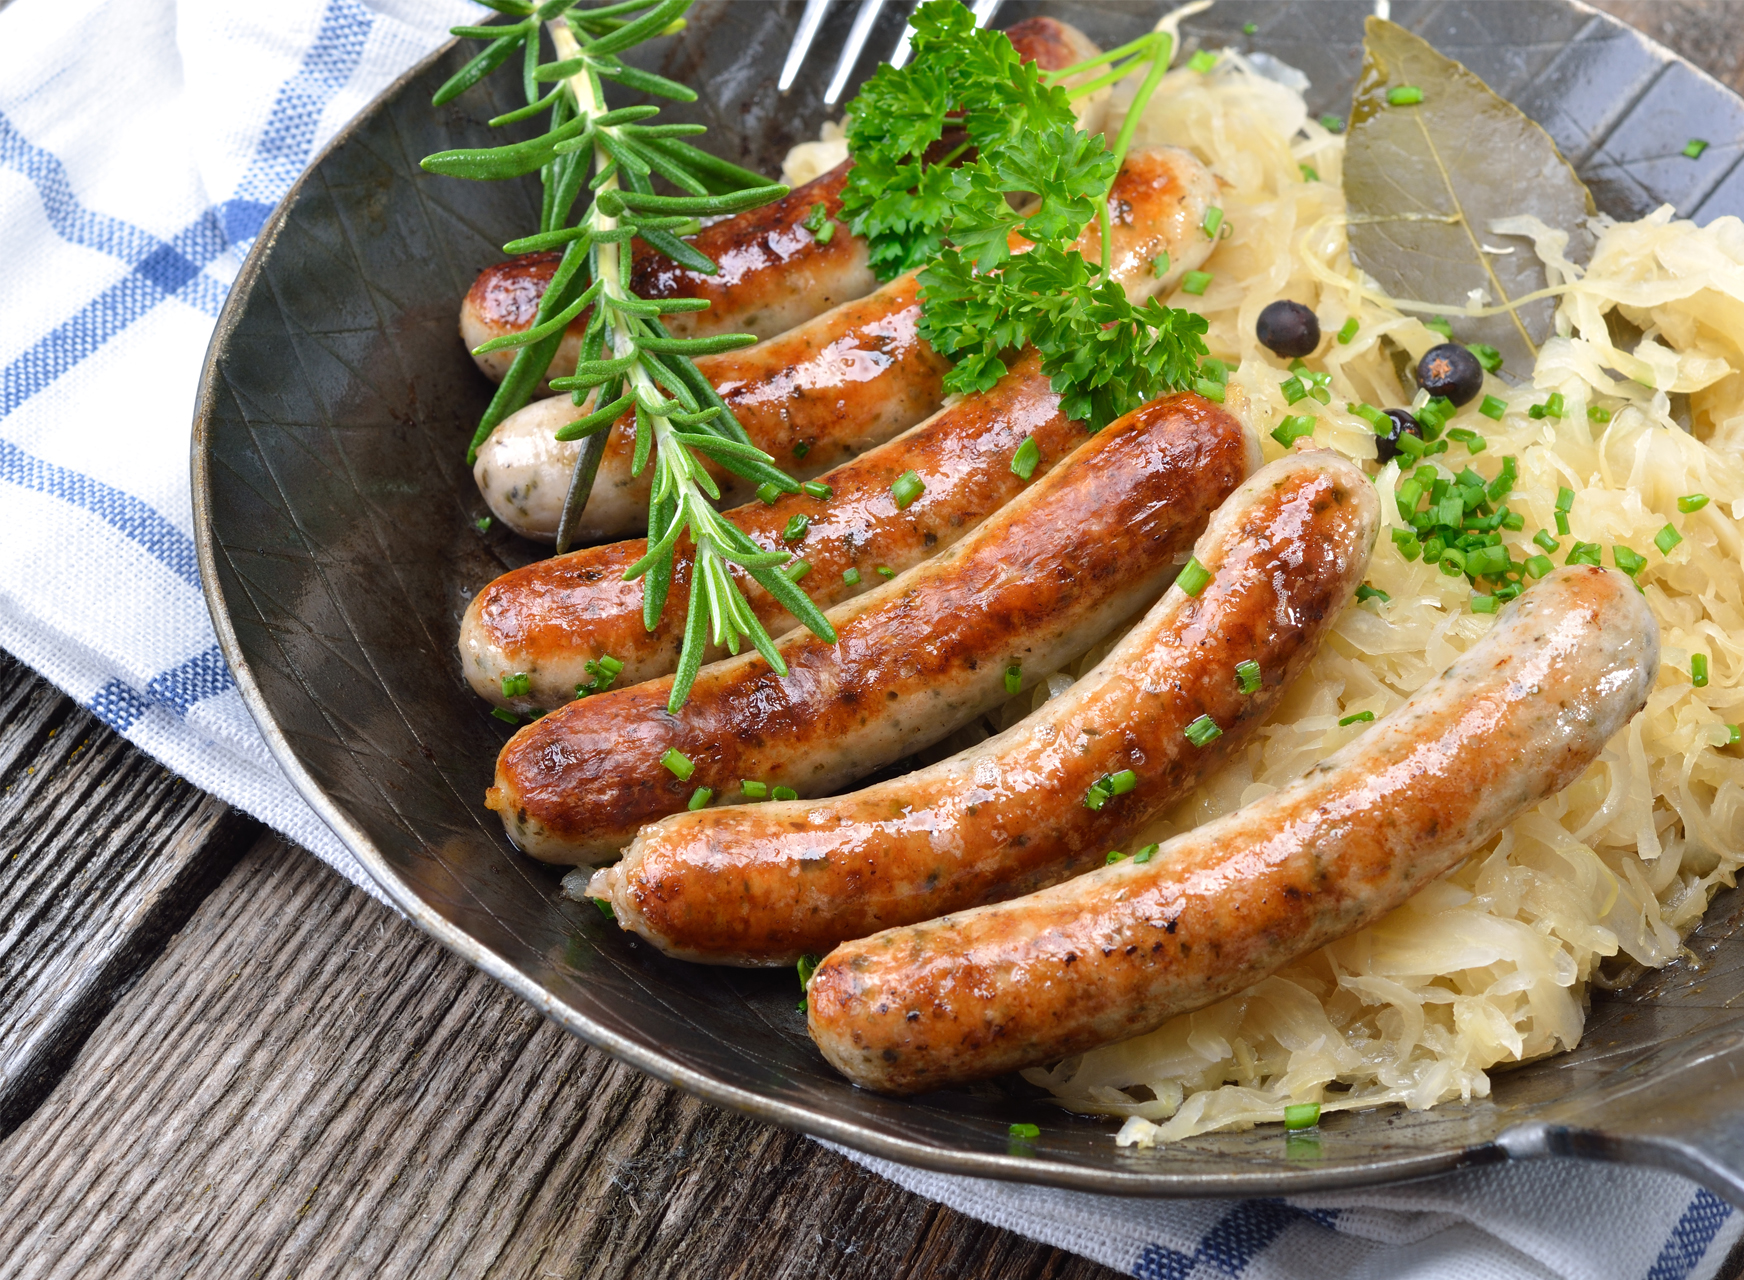 10 Most Popular German Meat Products